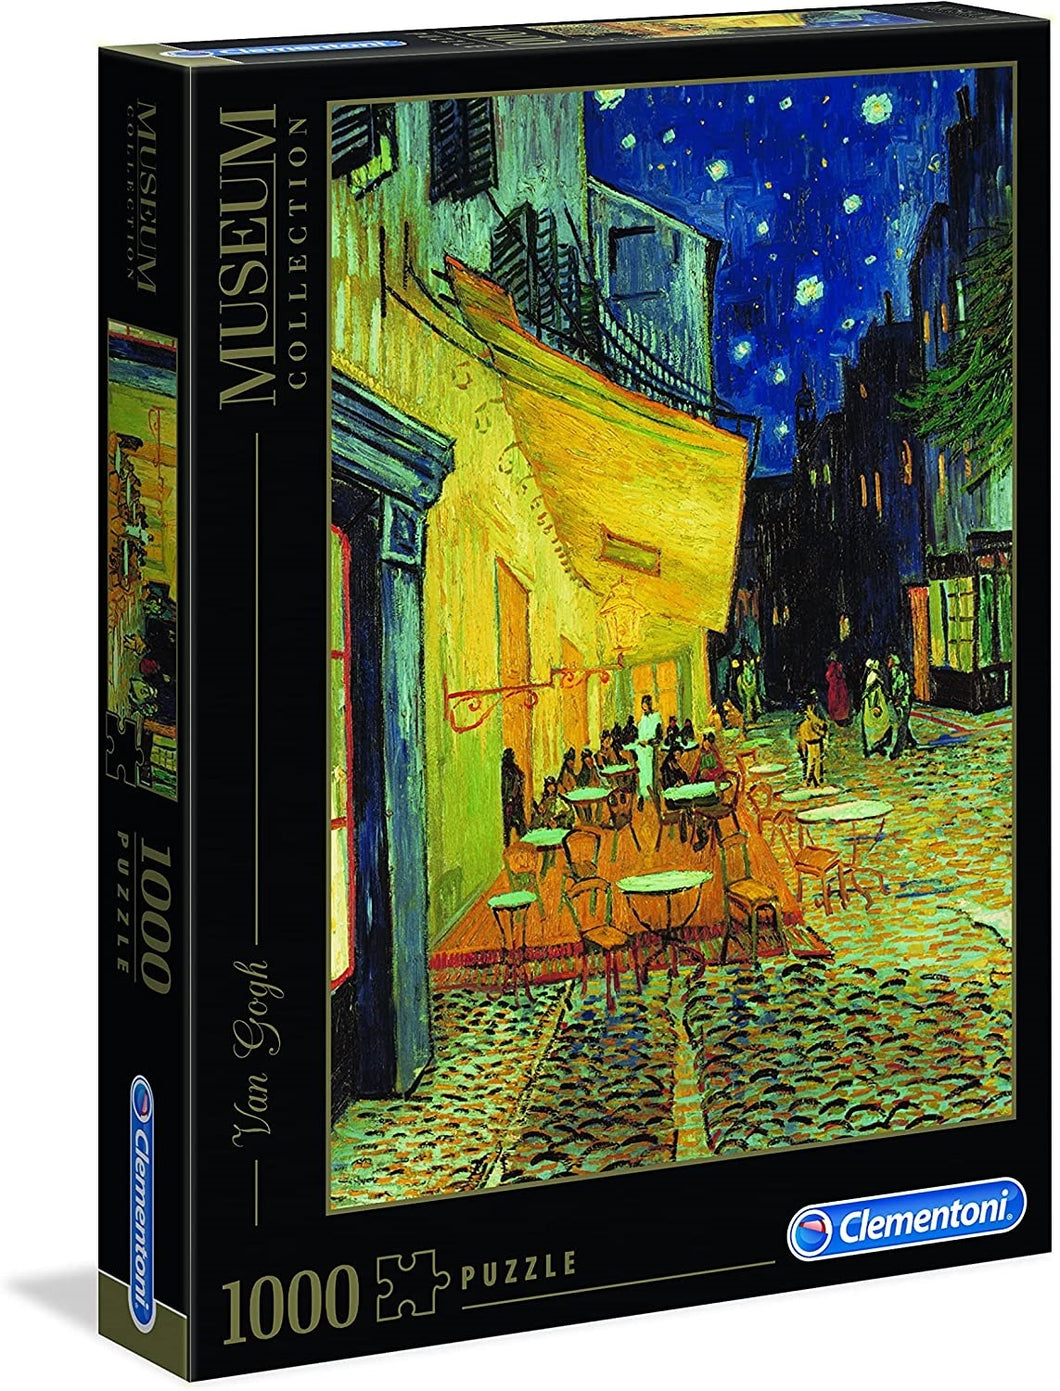 Cafe Terrace at Night - Van Gogh - Museum Collection - 1000 Piece Jigsaw Puzzle - Clementoni